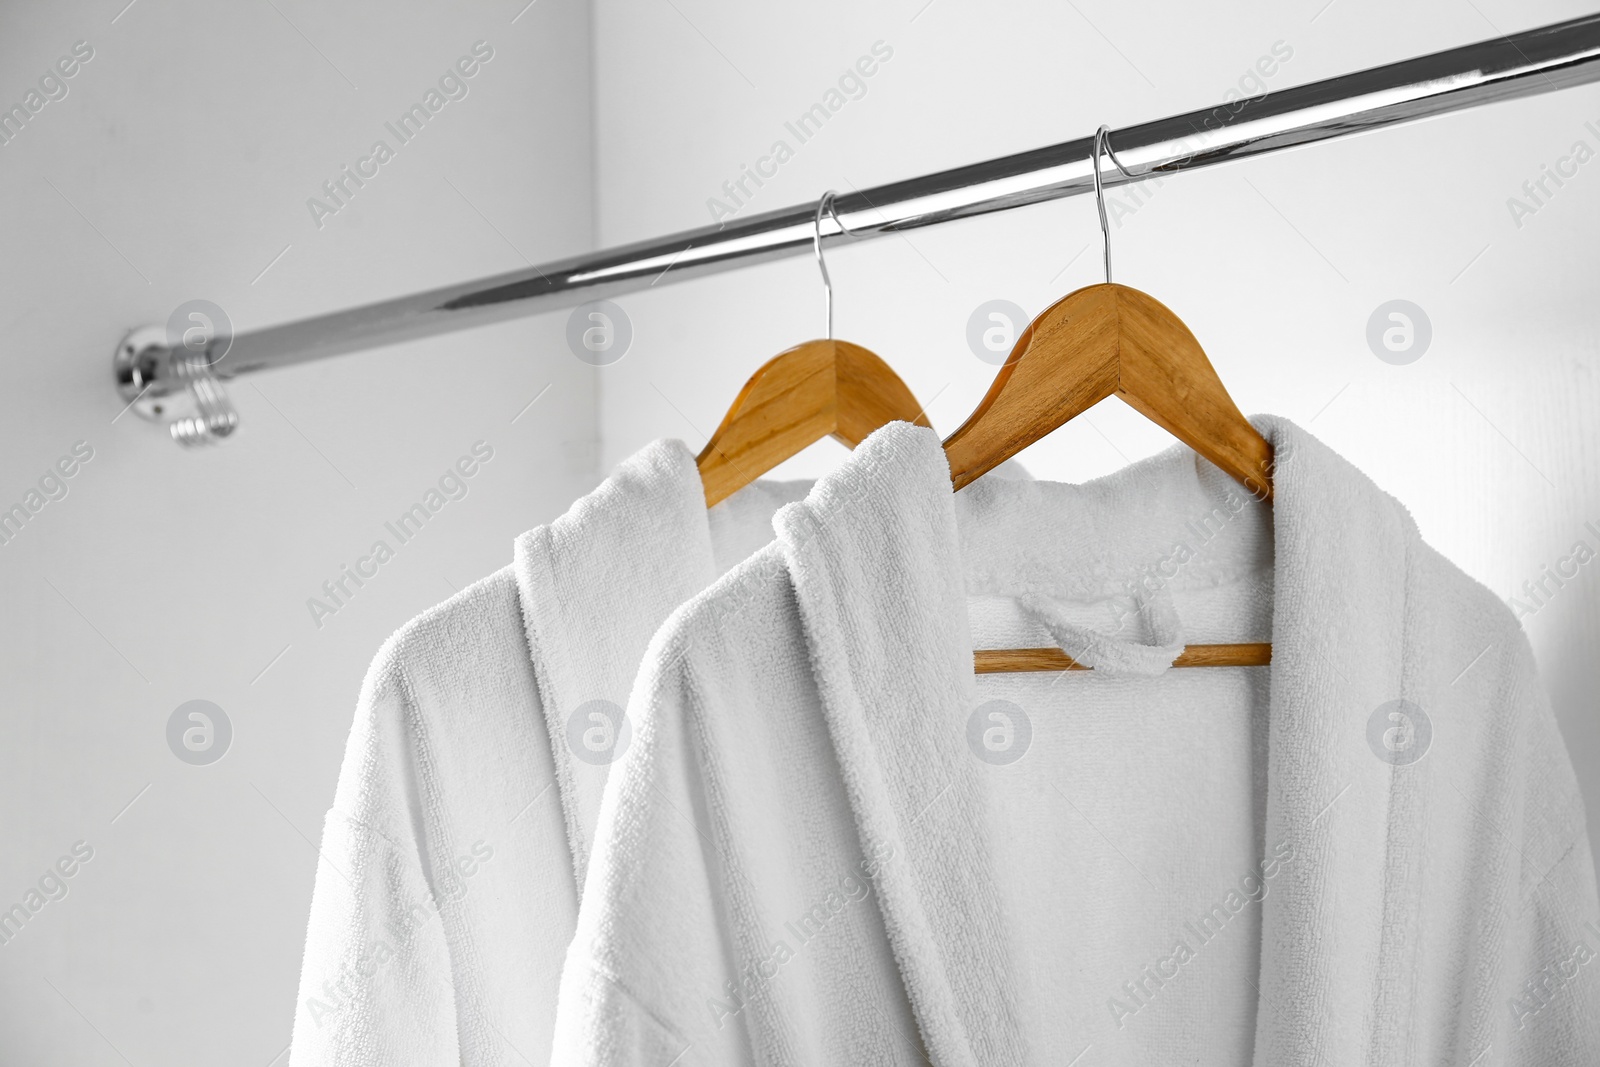 Photo of Soft comfortable bathrobes hanging on rack in closet